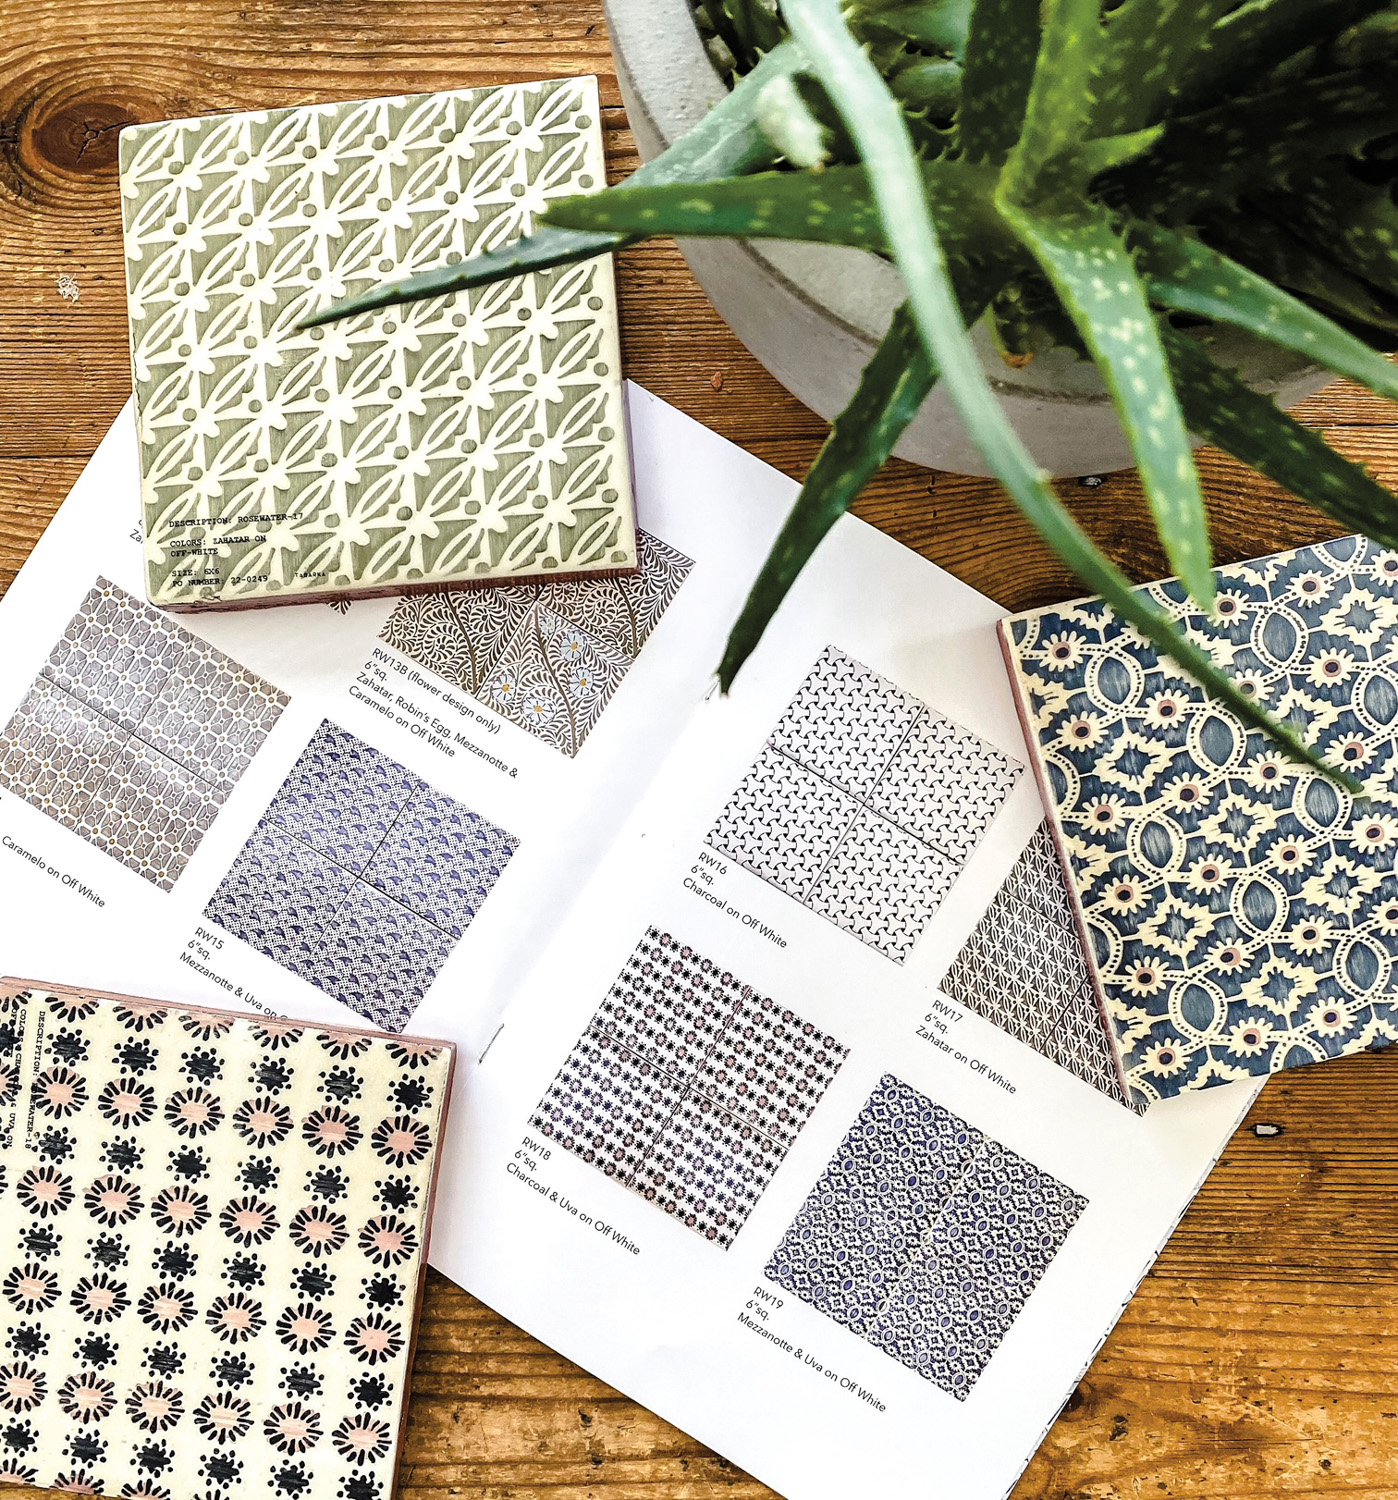 Flat lay of patterned tiles in blue, green and black.